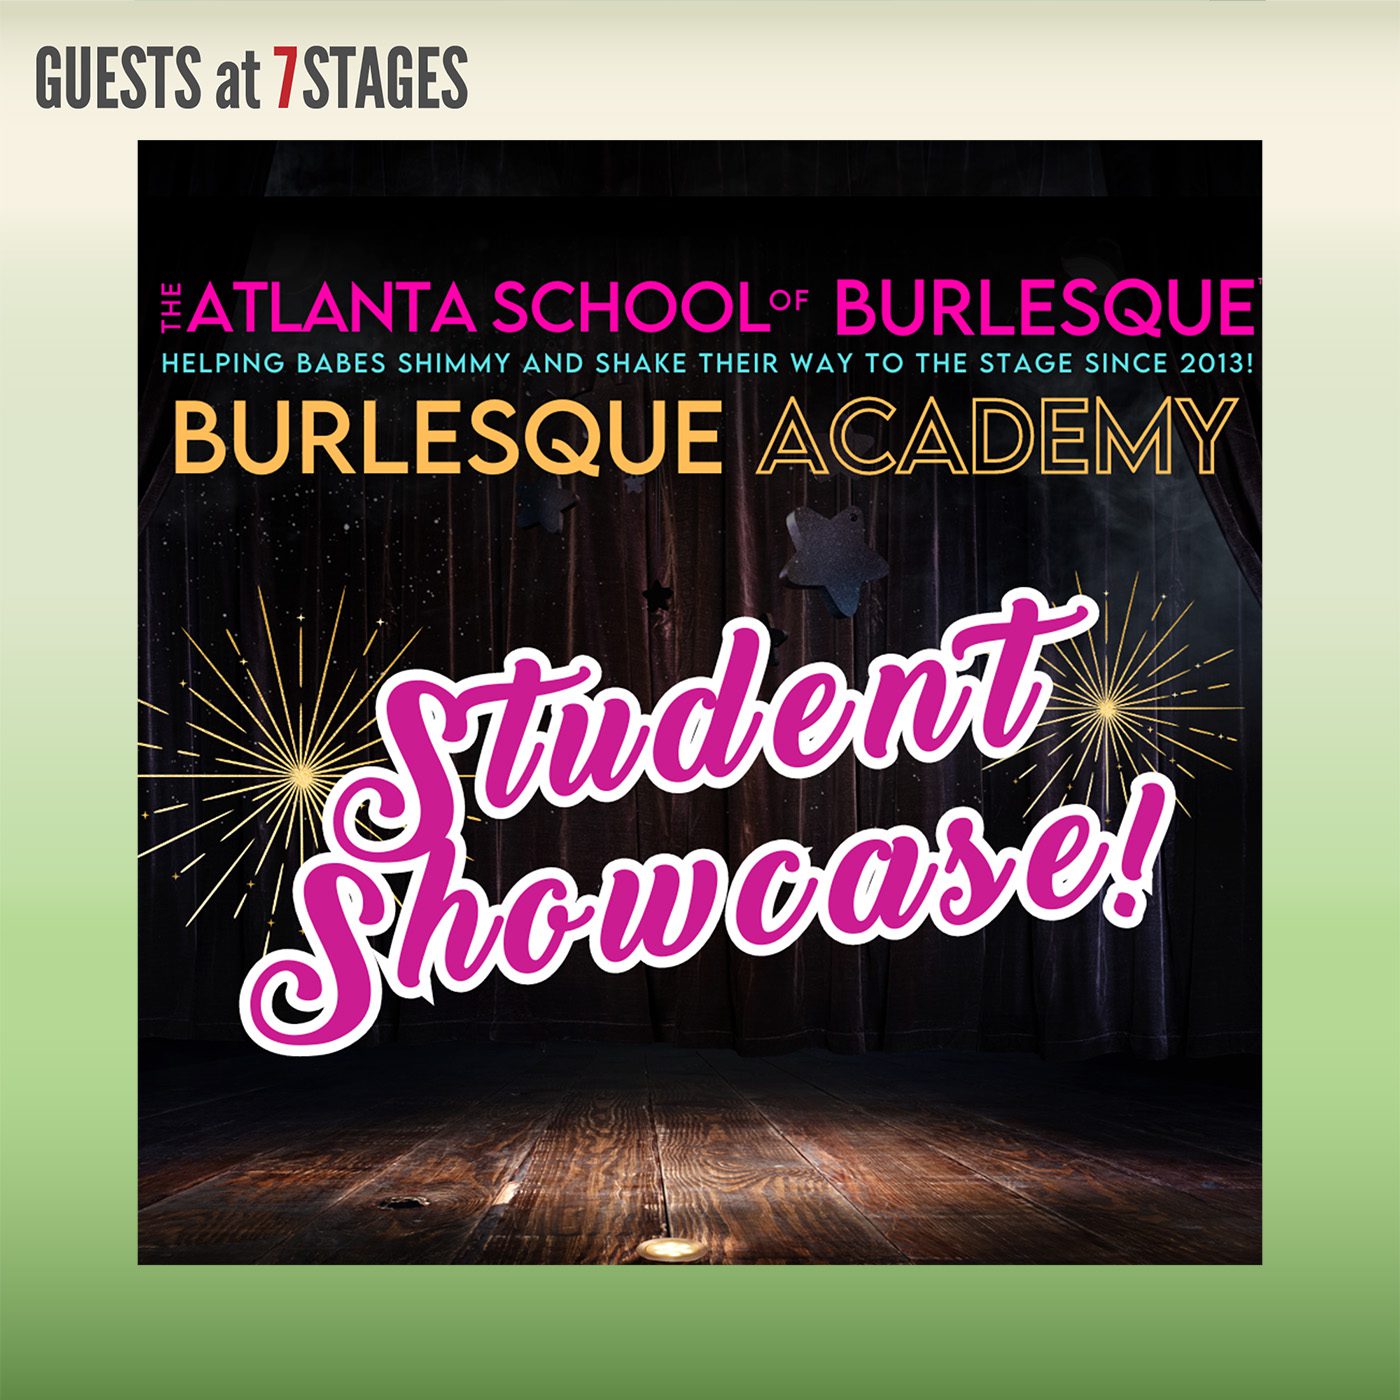 The Atlanta School of Burlesque: Helping babes shimmy and shake their way to the stage since 2013! Burlesque Academy Student Showcase